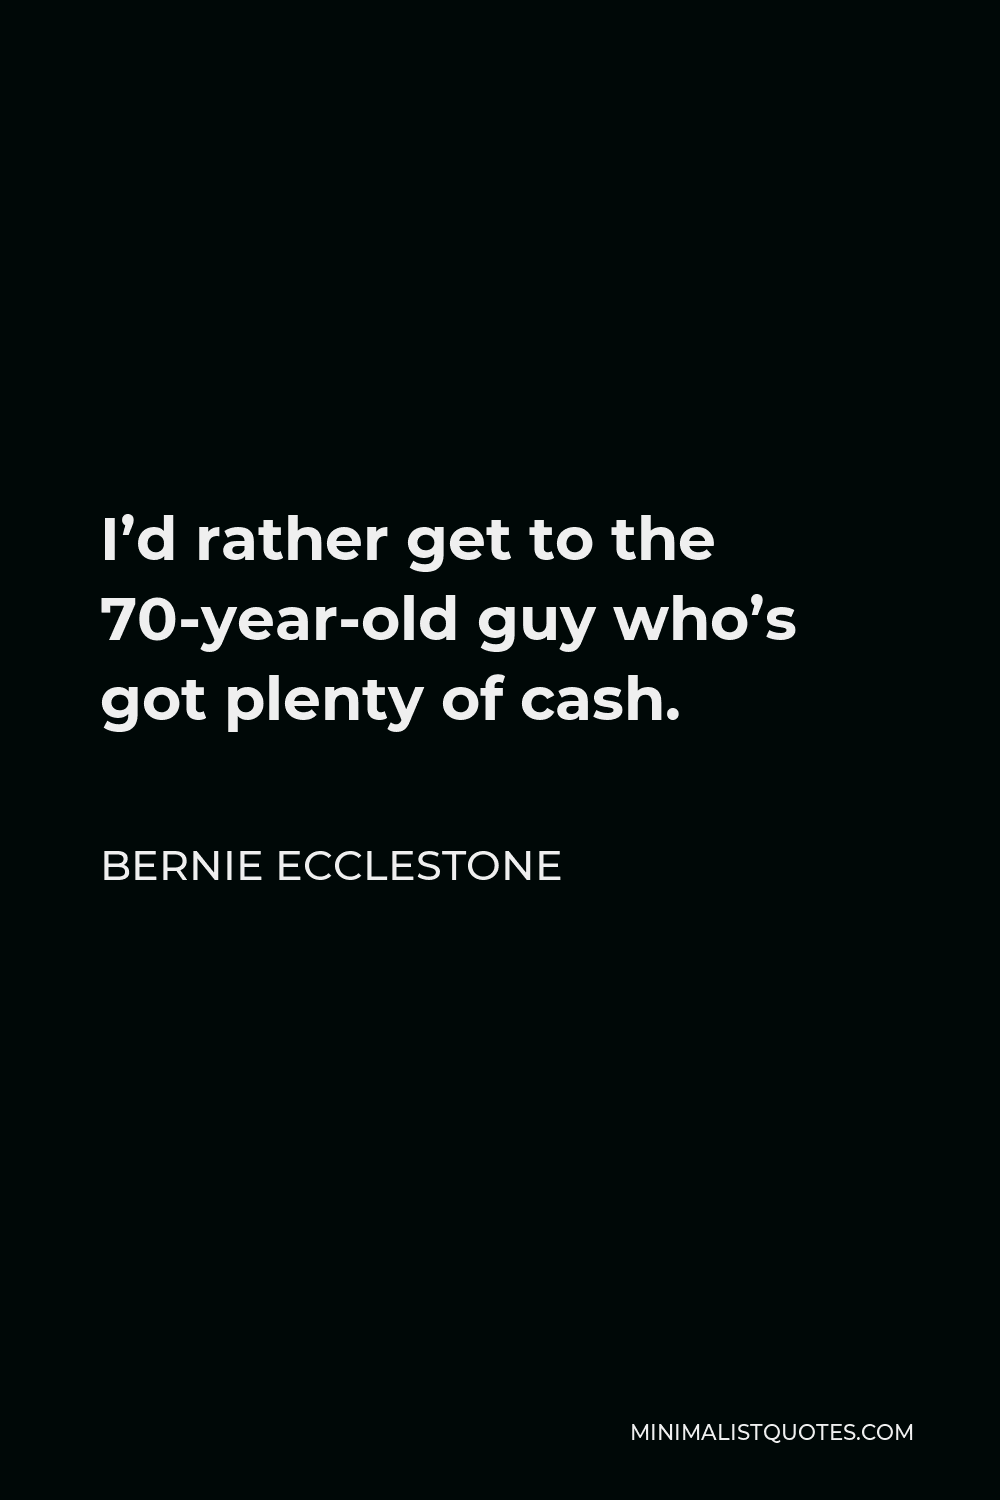 Bernie Ecclestone Quote - I’d rather get to the 70-year-old guy who’s got plenty of cash.